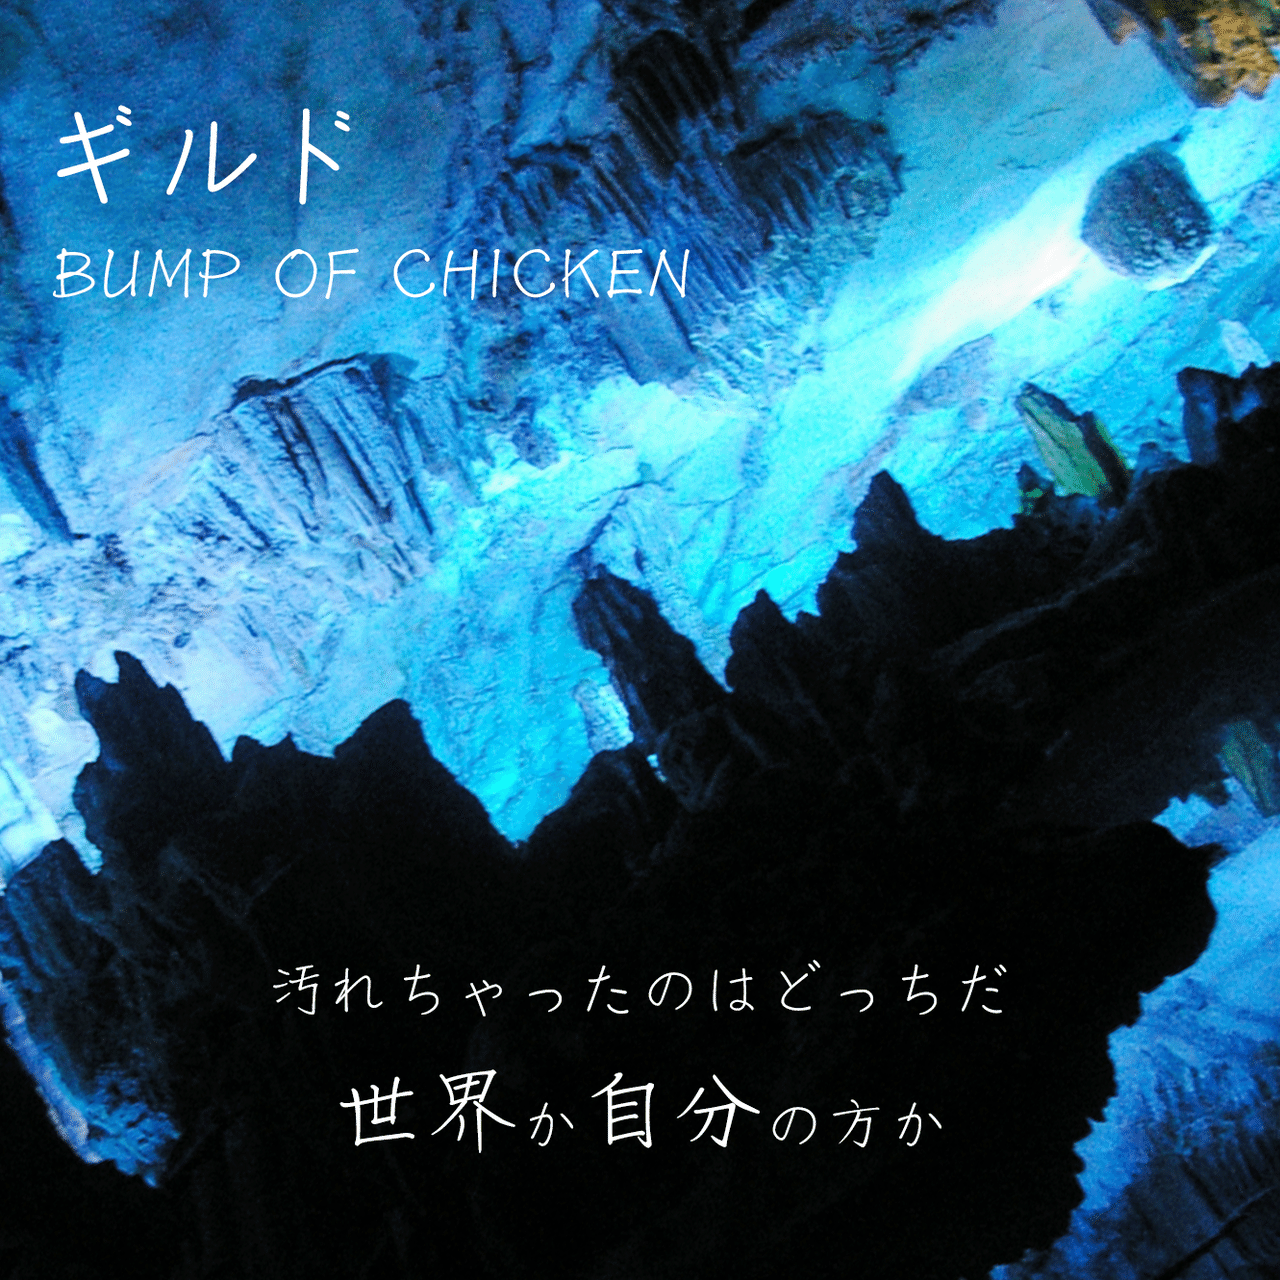 14 Favorite Song ギルド Bump Of Chicken アッシュ Note